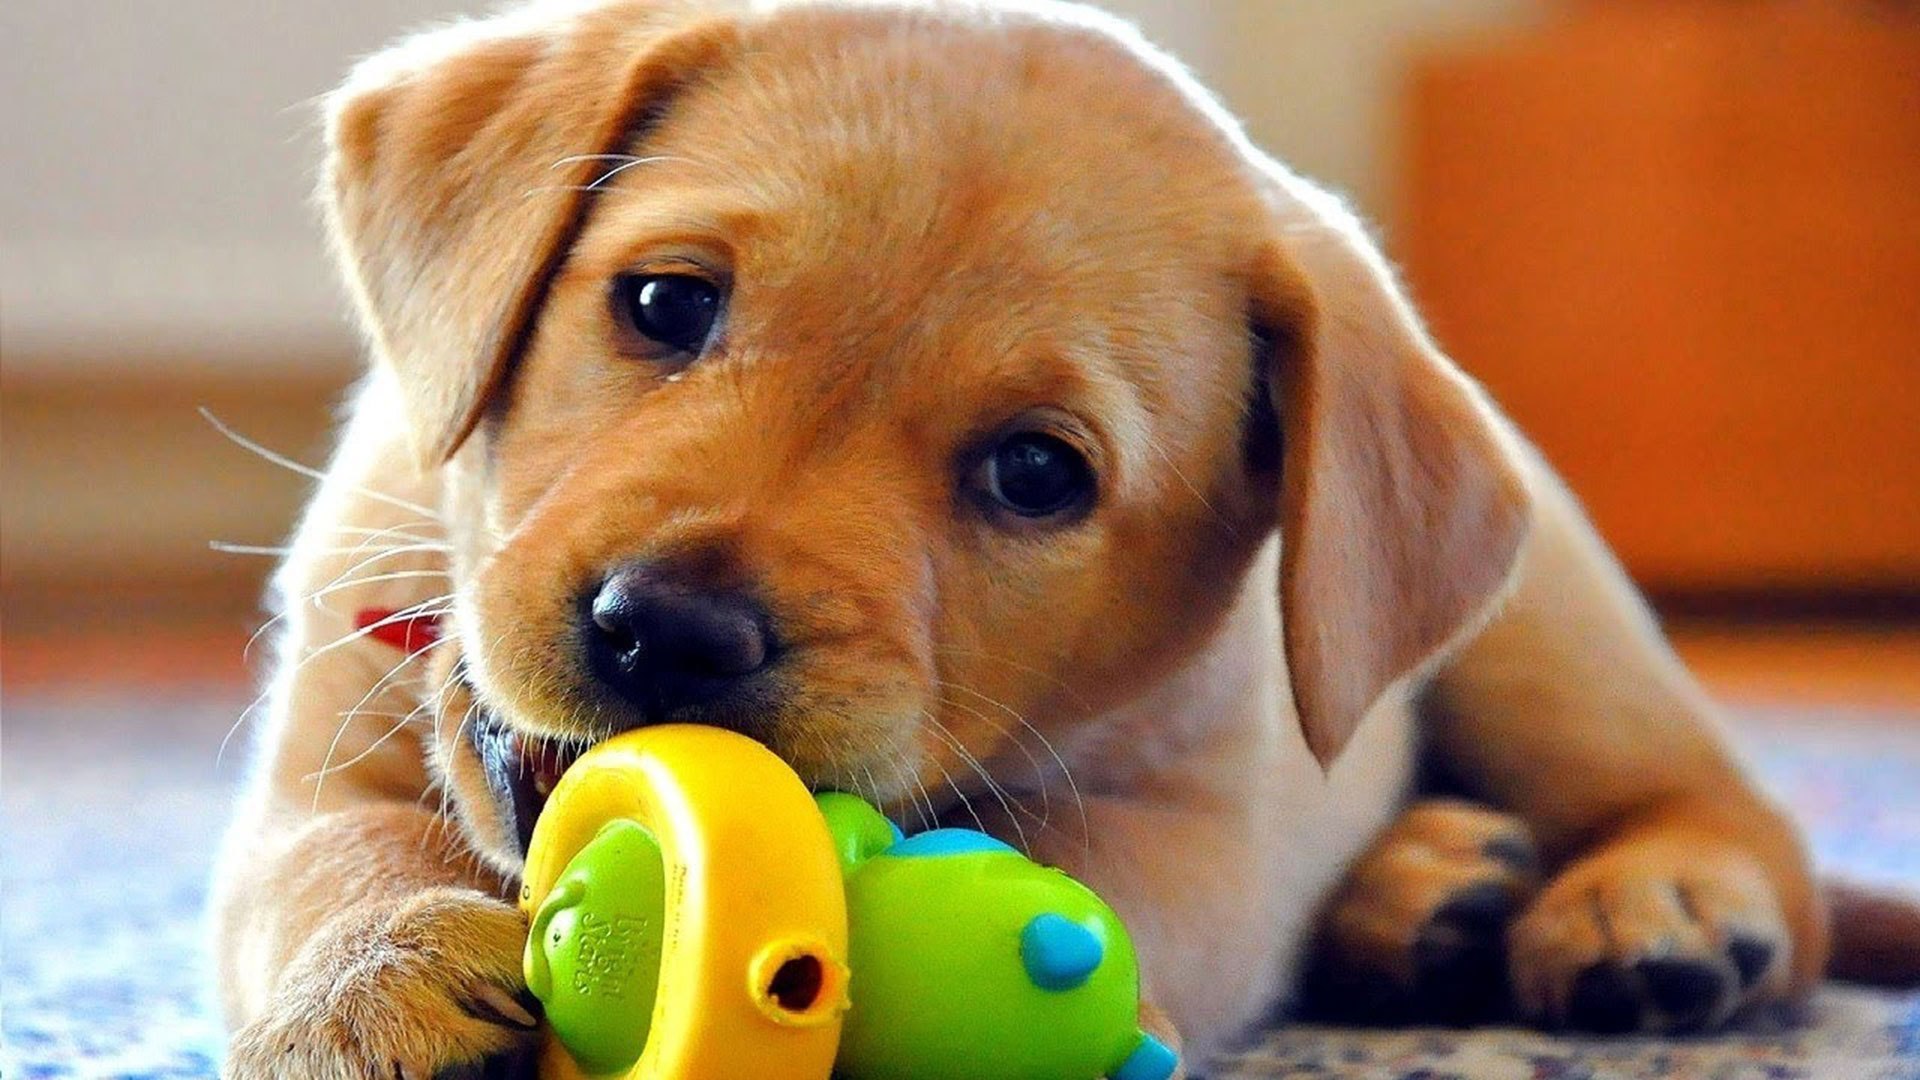 Cute Dog Play With Toy[1920×1080] Wallpaper Wpc9203955 - Dog Playing With Dog Toys , HD Wallpaper & Backgrounds